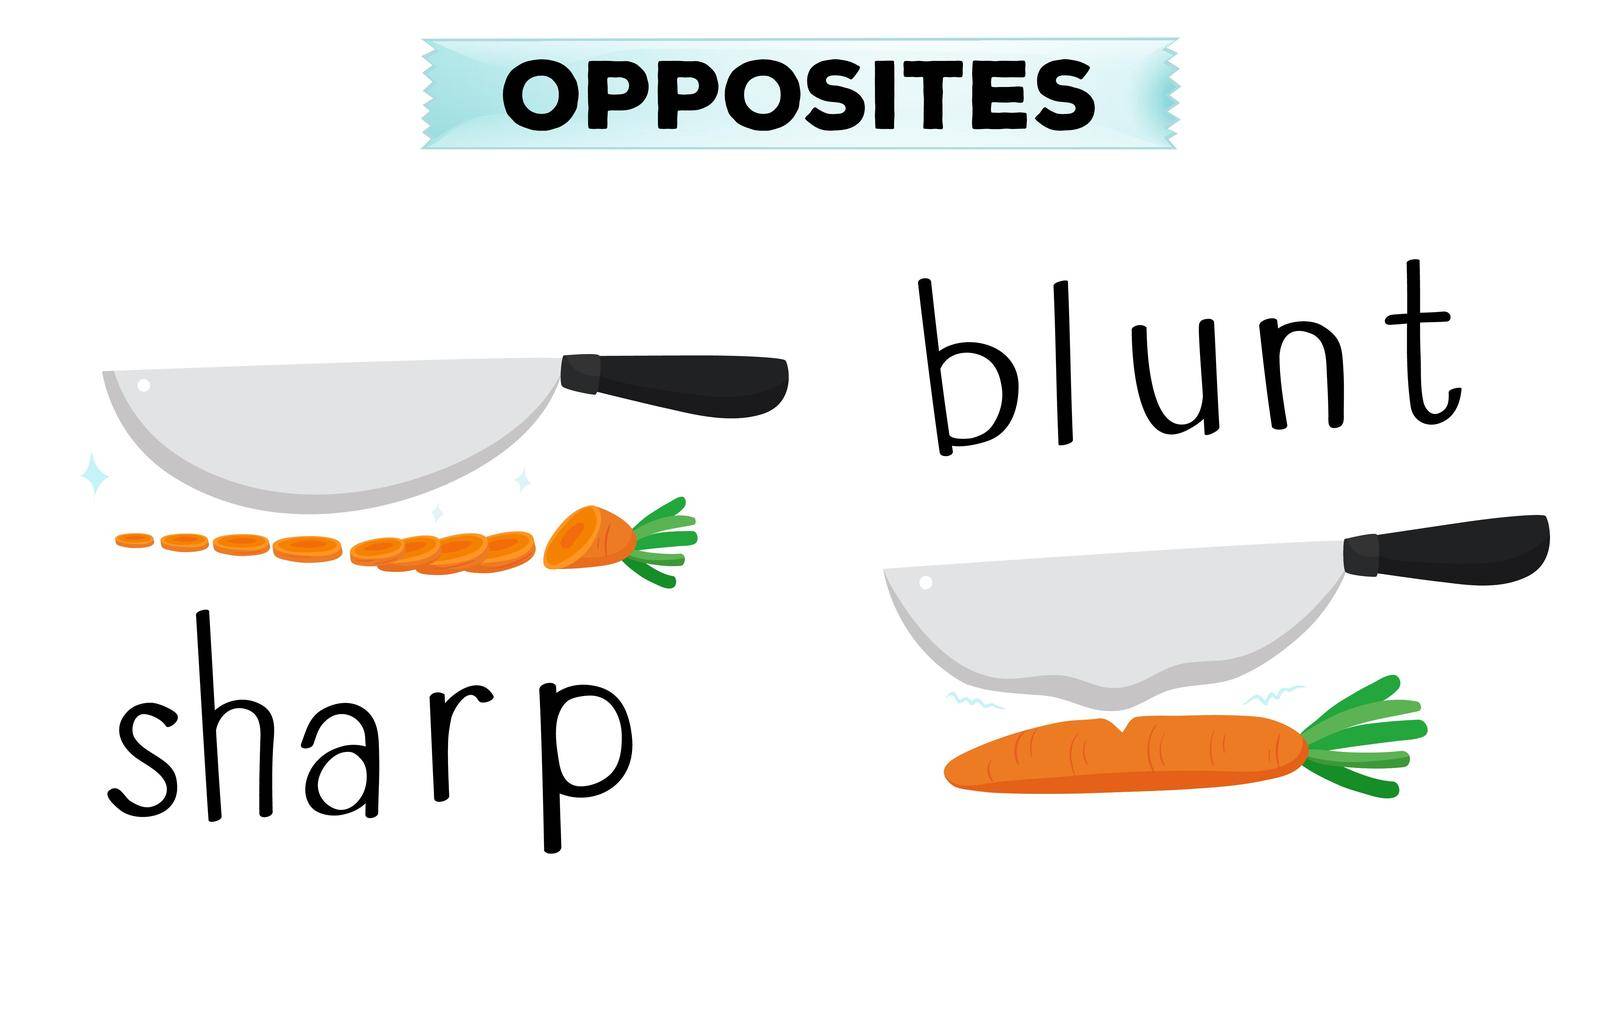 Opposite words for sharp and blunt by iimages